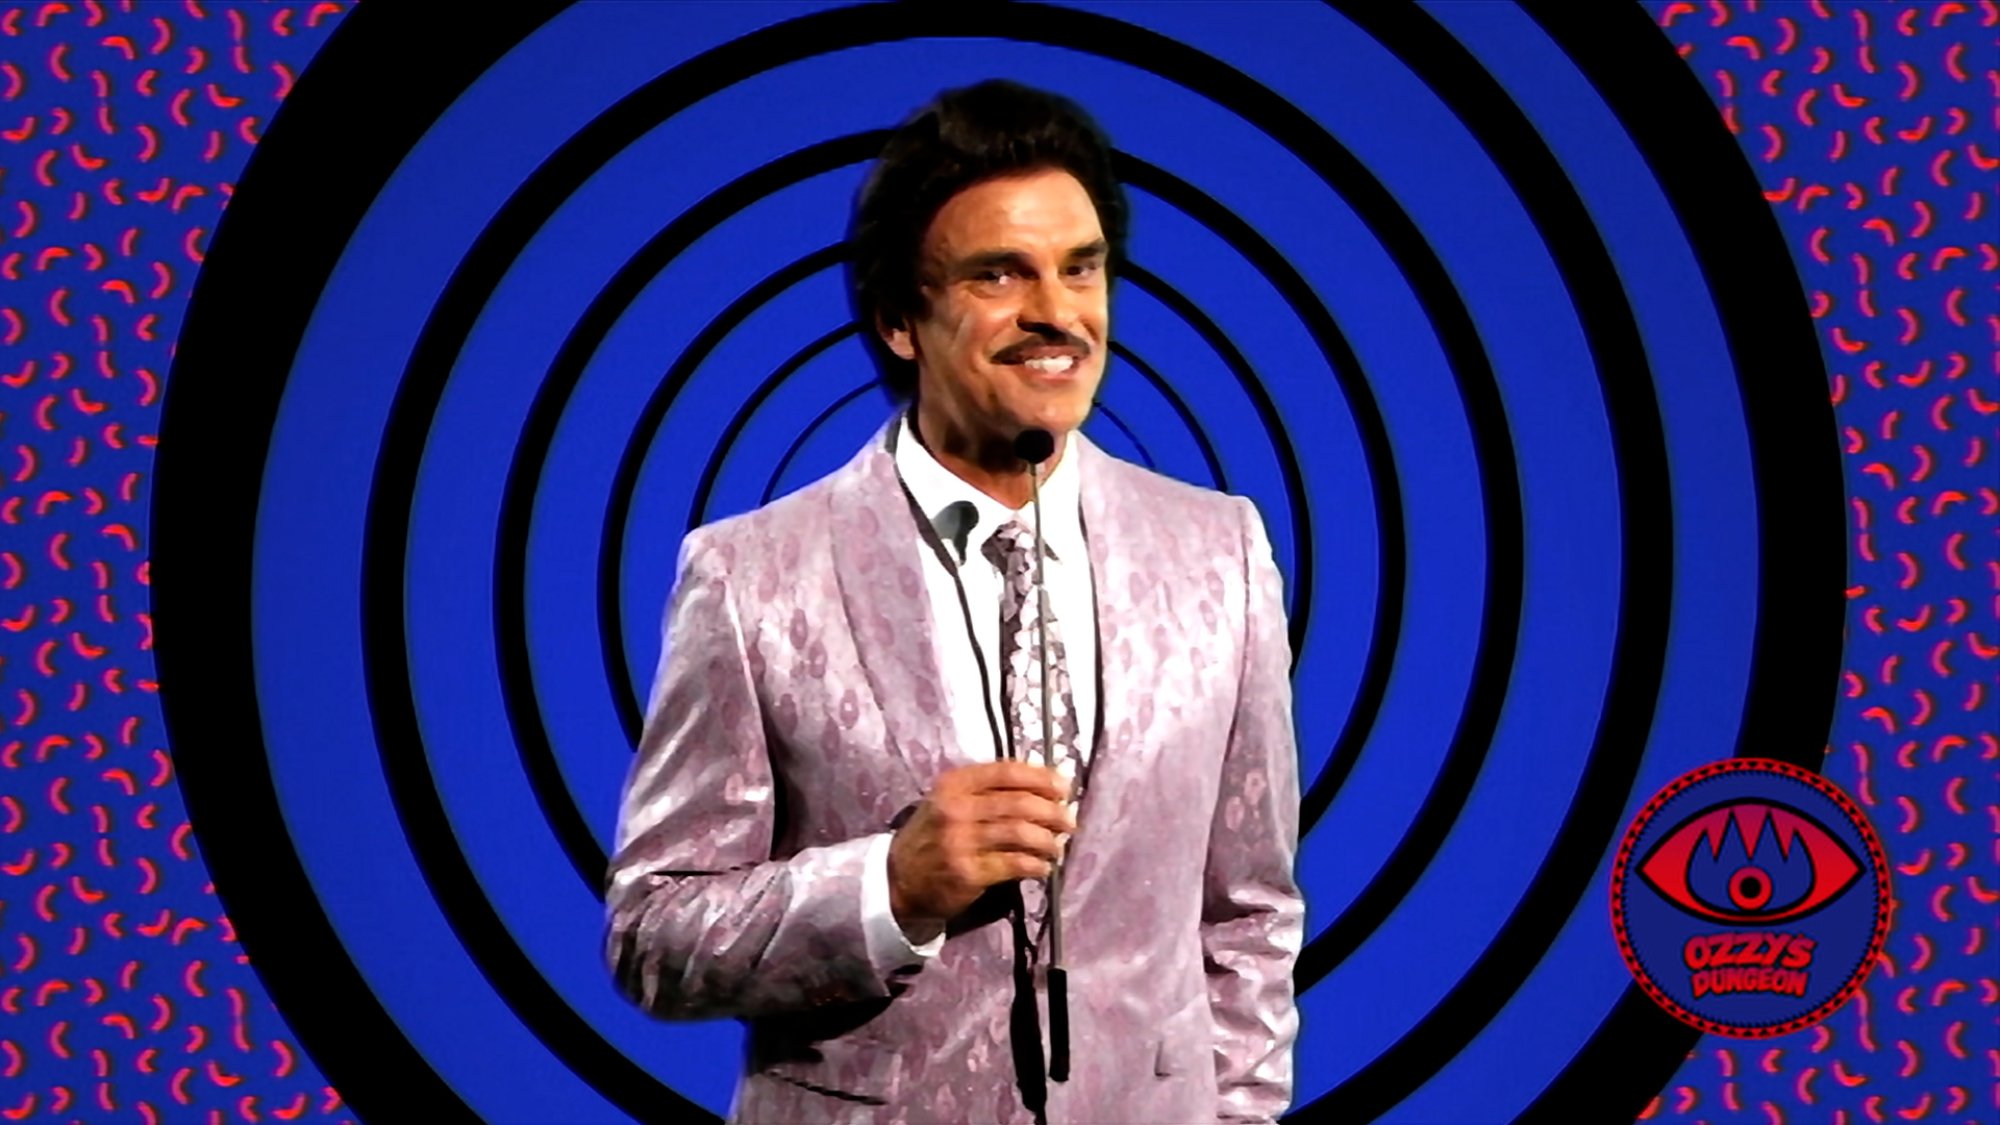 'V_H_S_99' Steven Ogg as Host wearing a pink suit with a white collared dress shirt, holding a microphone in front of a swirly blue background